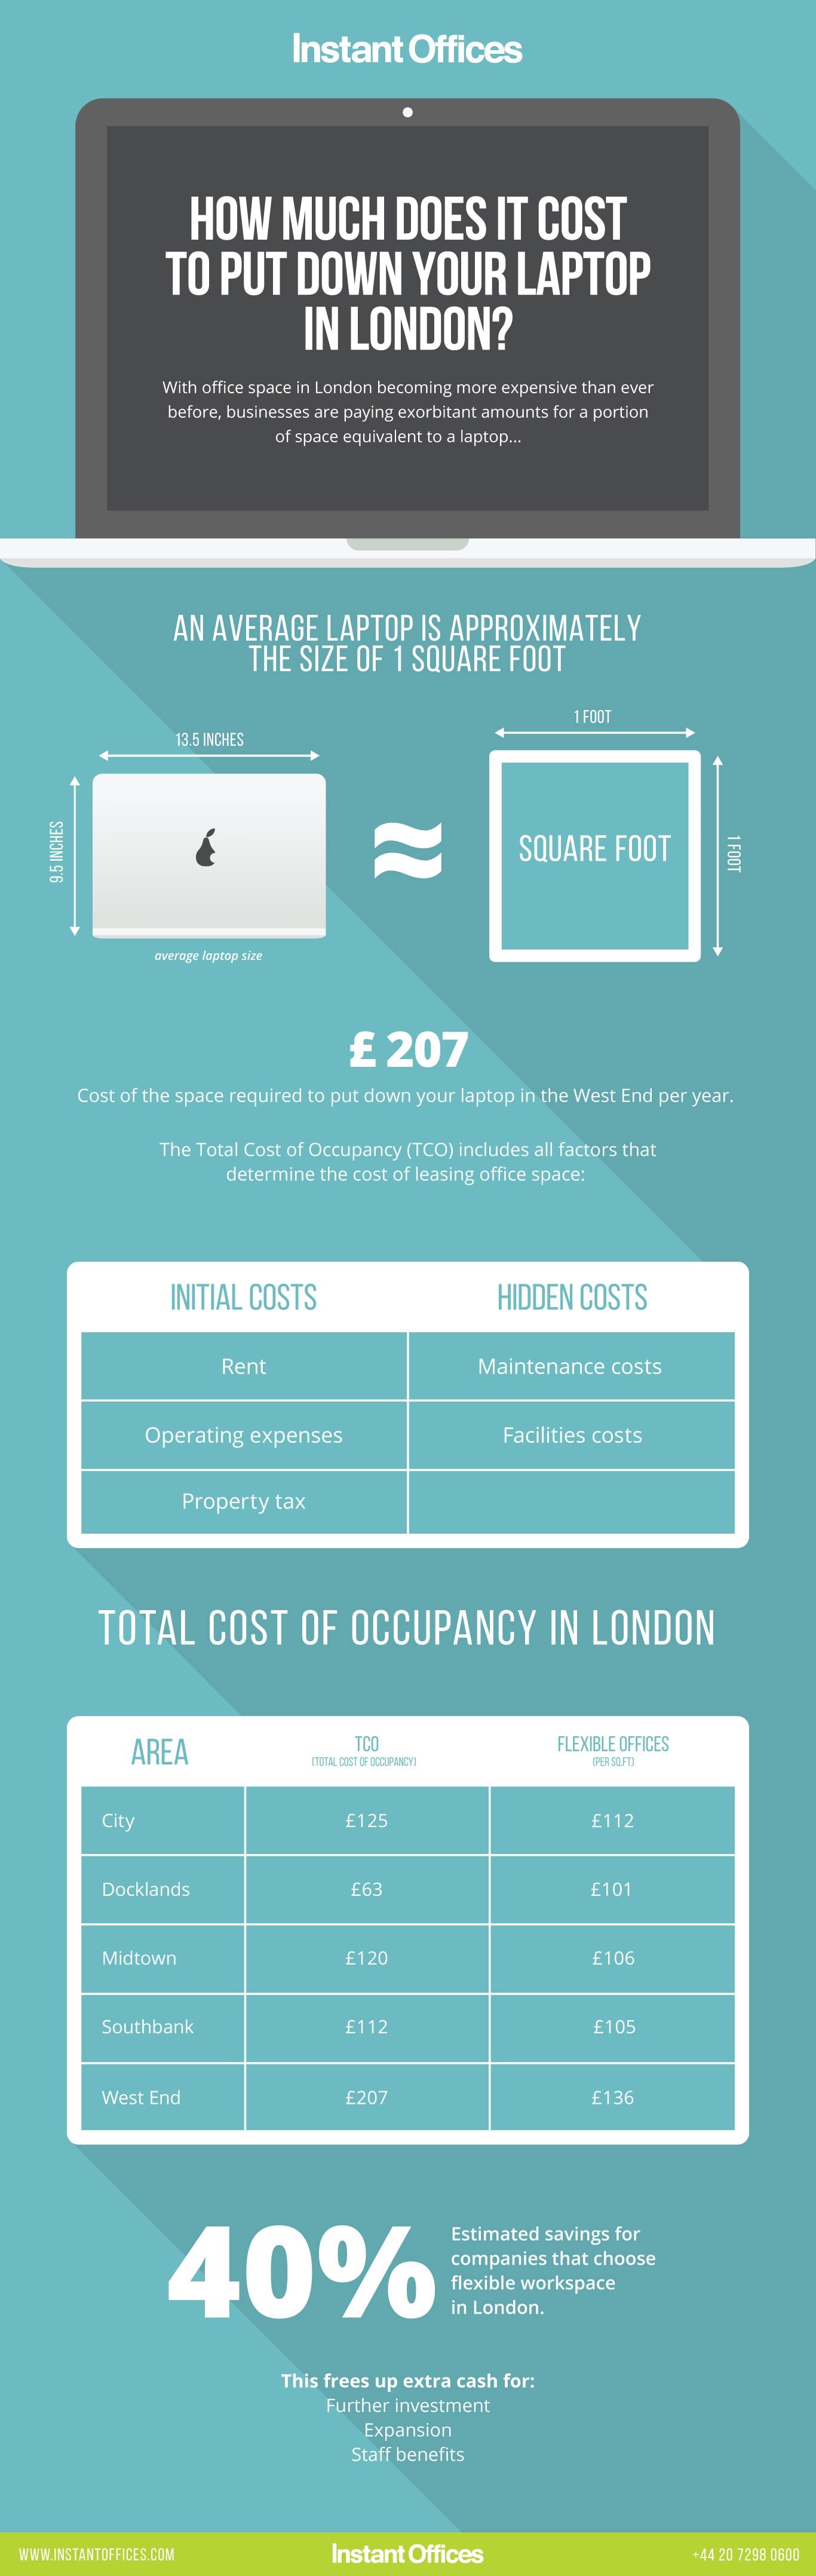 How Much Does It Cost to Put Down Your Laptop in London